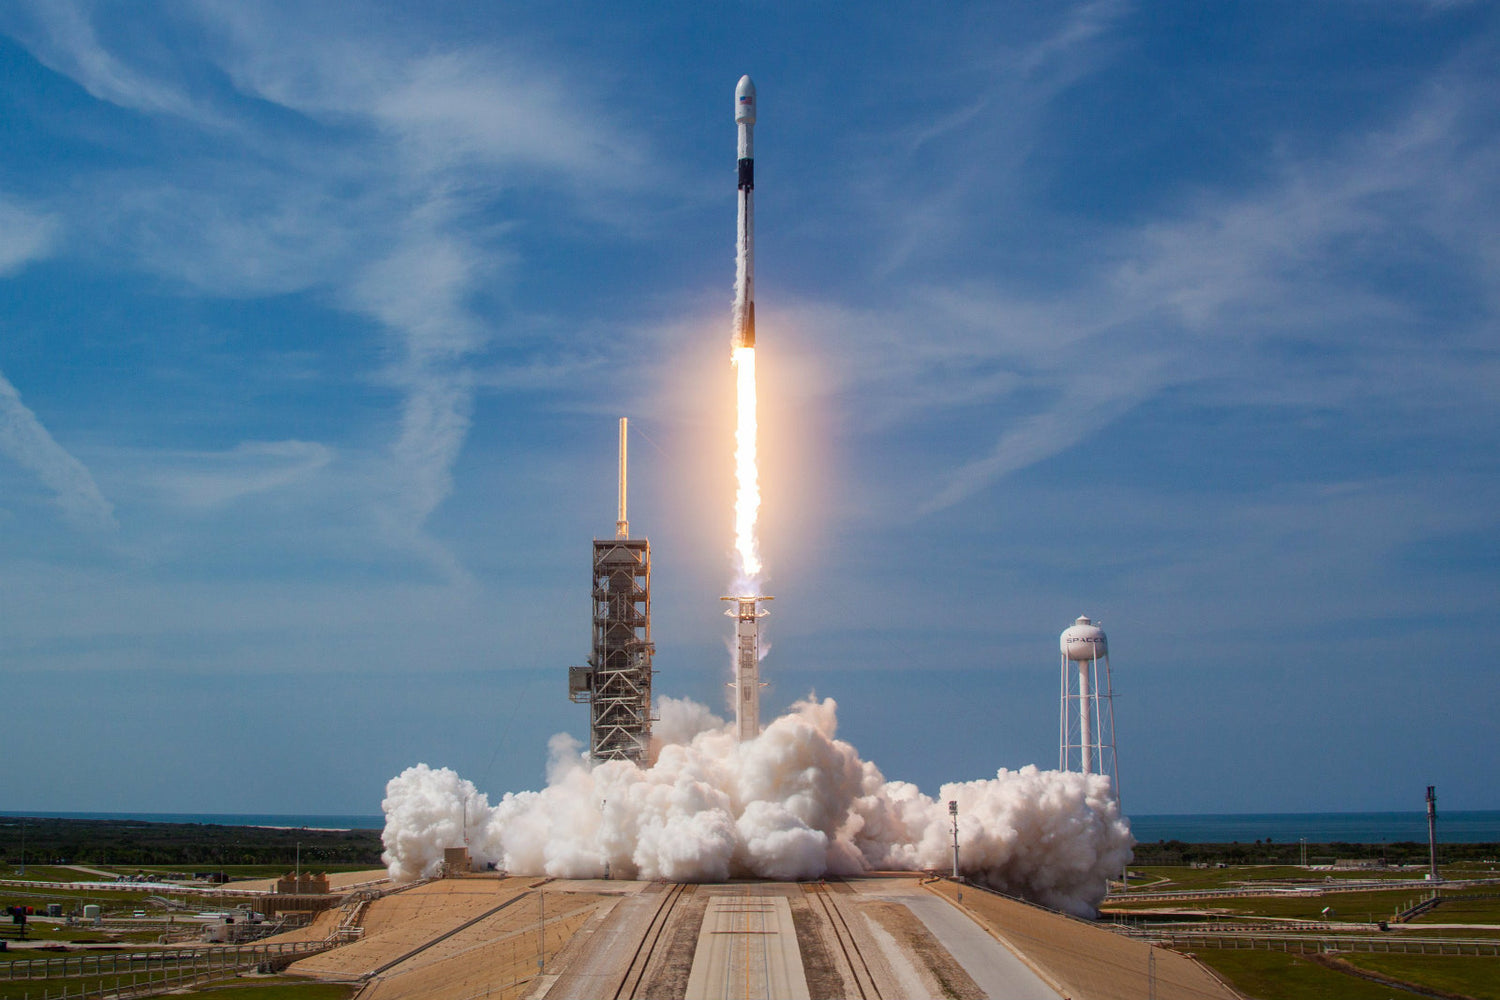 SpaceX Falcon 9 rocket is now available for online booking under the small satellite rideshare program